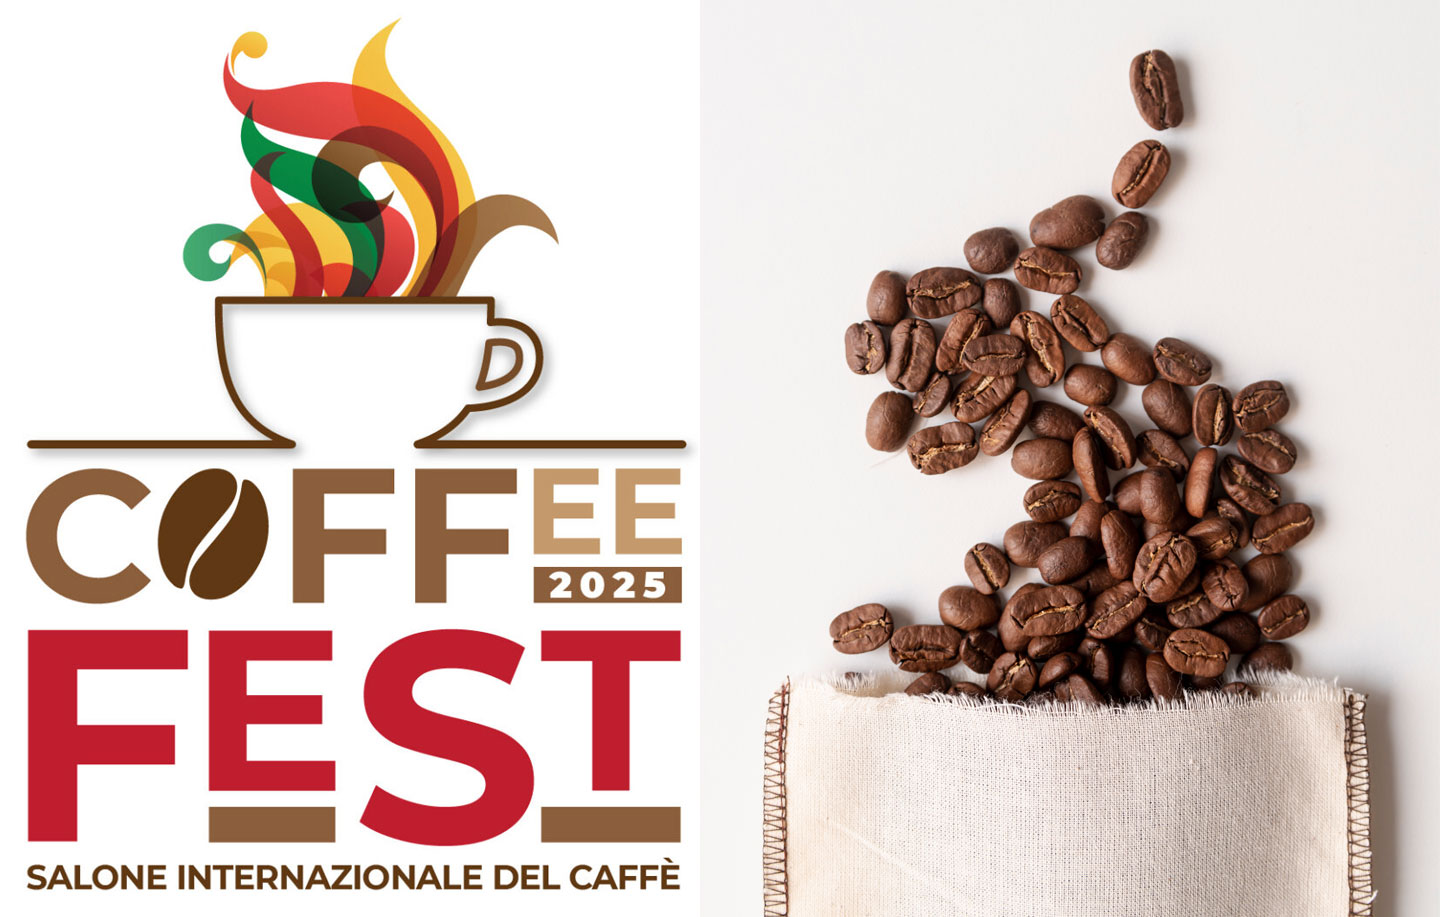 Everyone ready for the Coffee Fest? The first edition of the International Coffee Fair is starting!